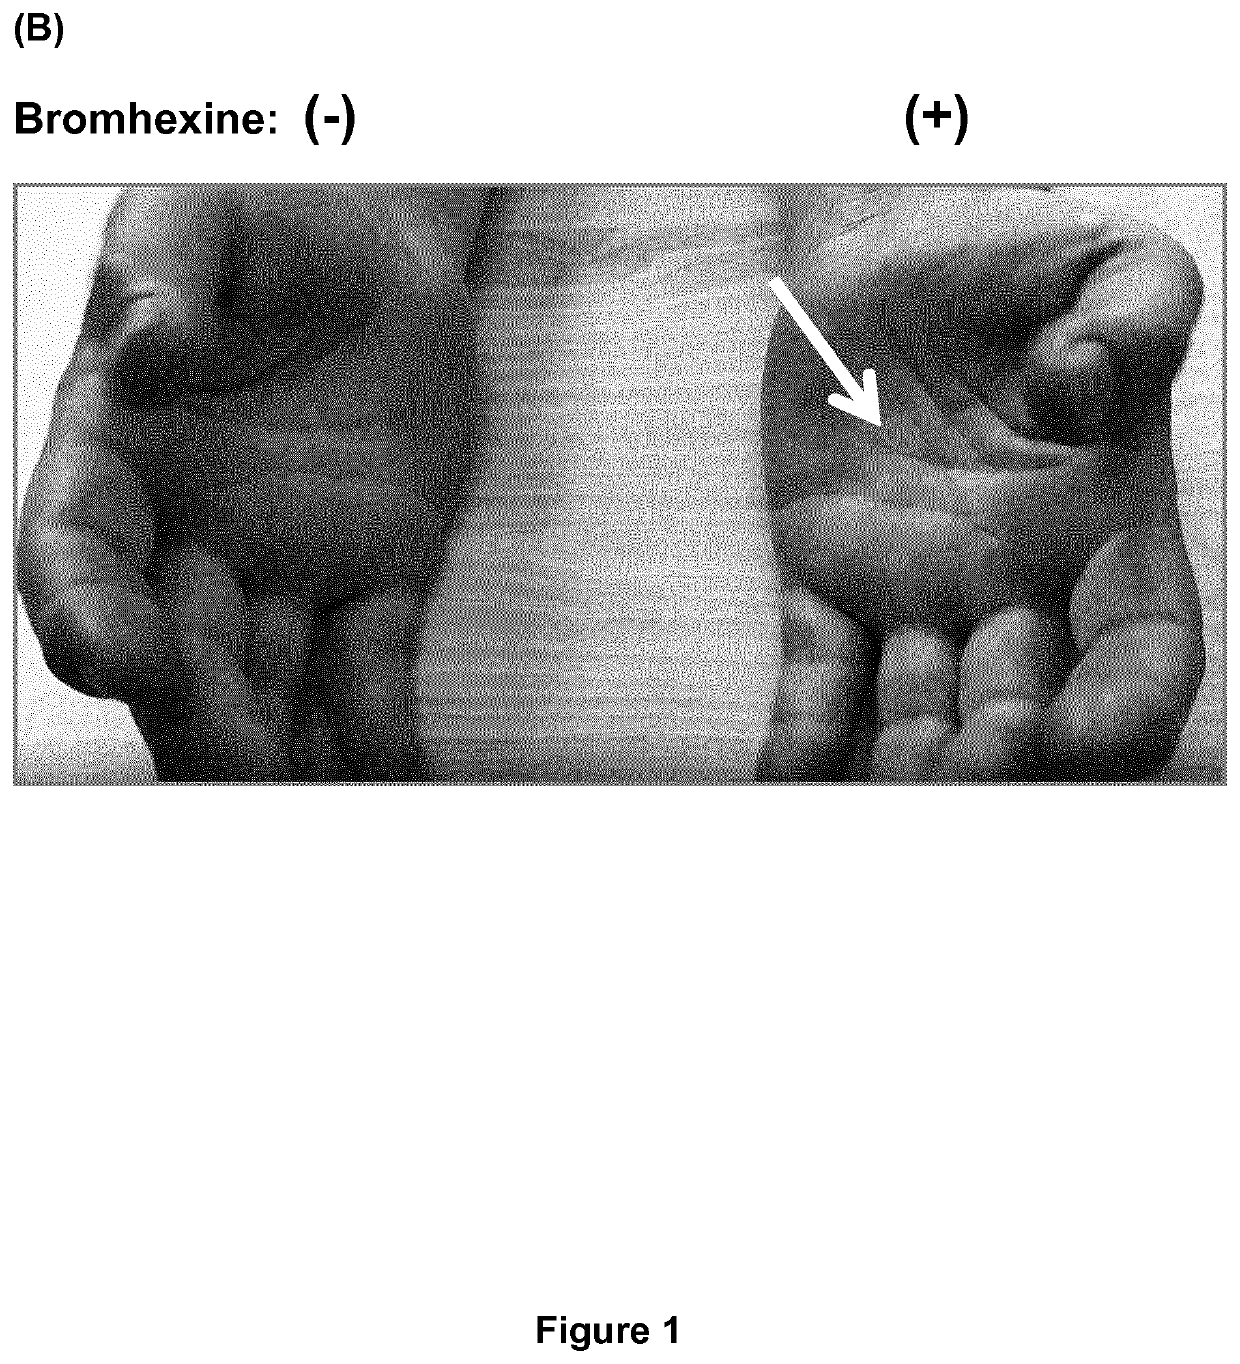 Bromhexine for the treatment of pain